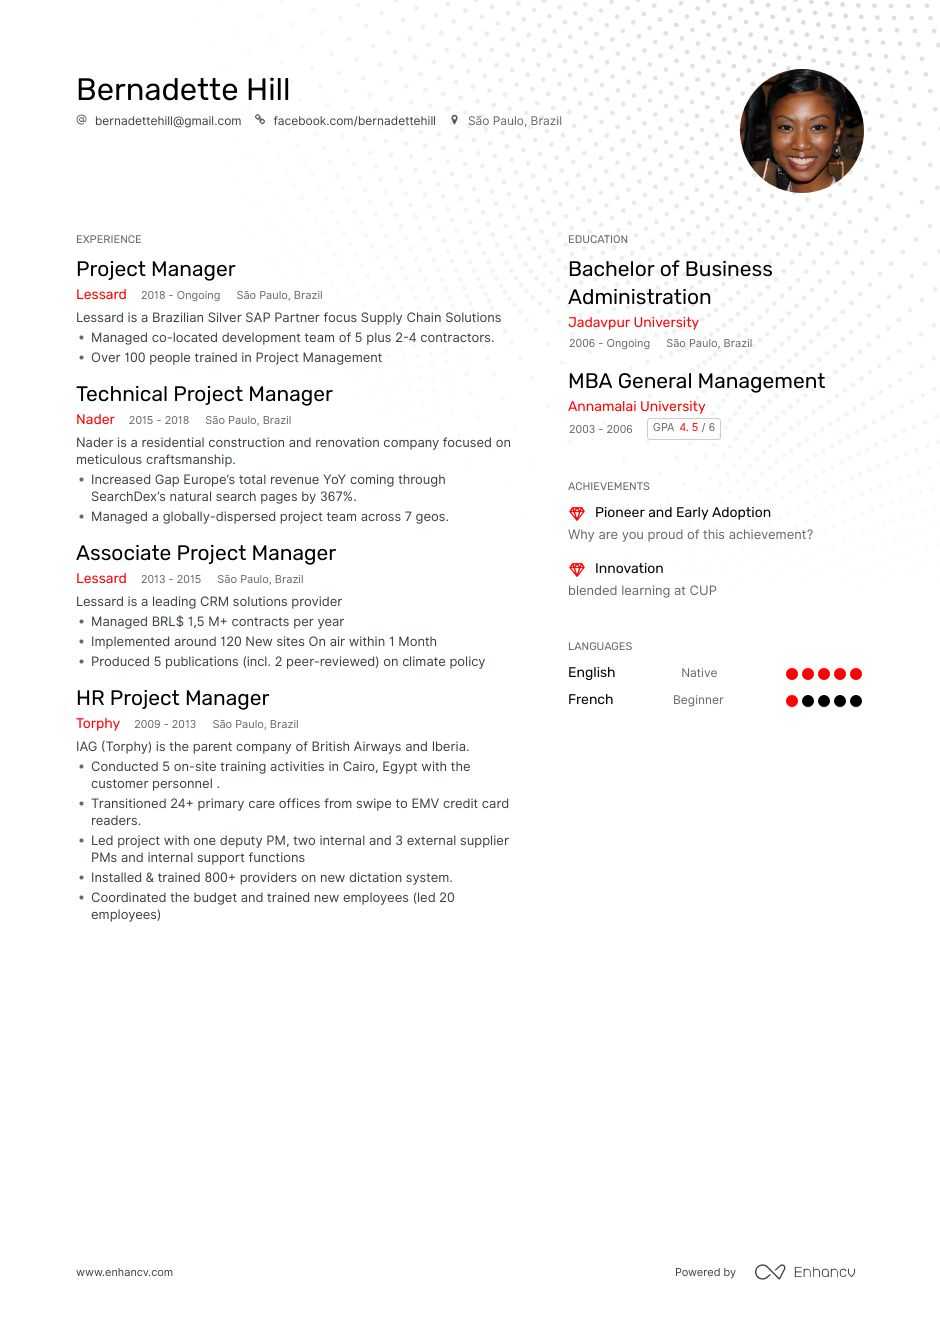 Project Manager Resume Examples 2019 from enhancv.com